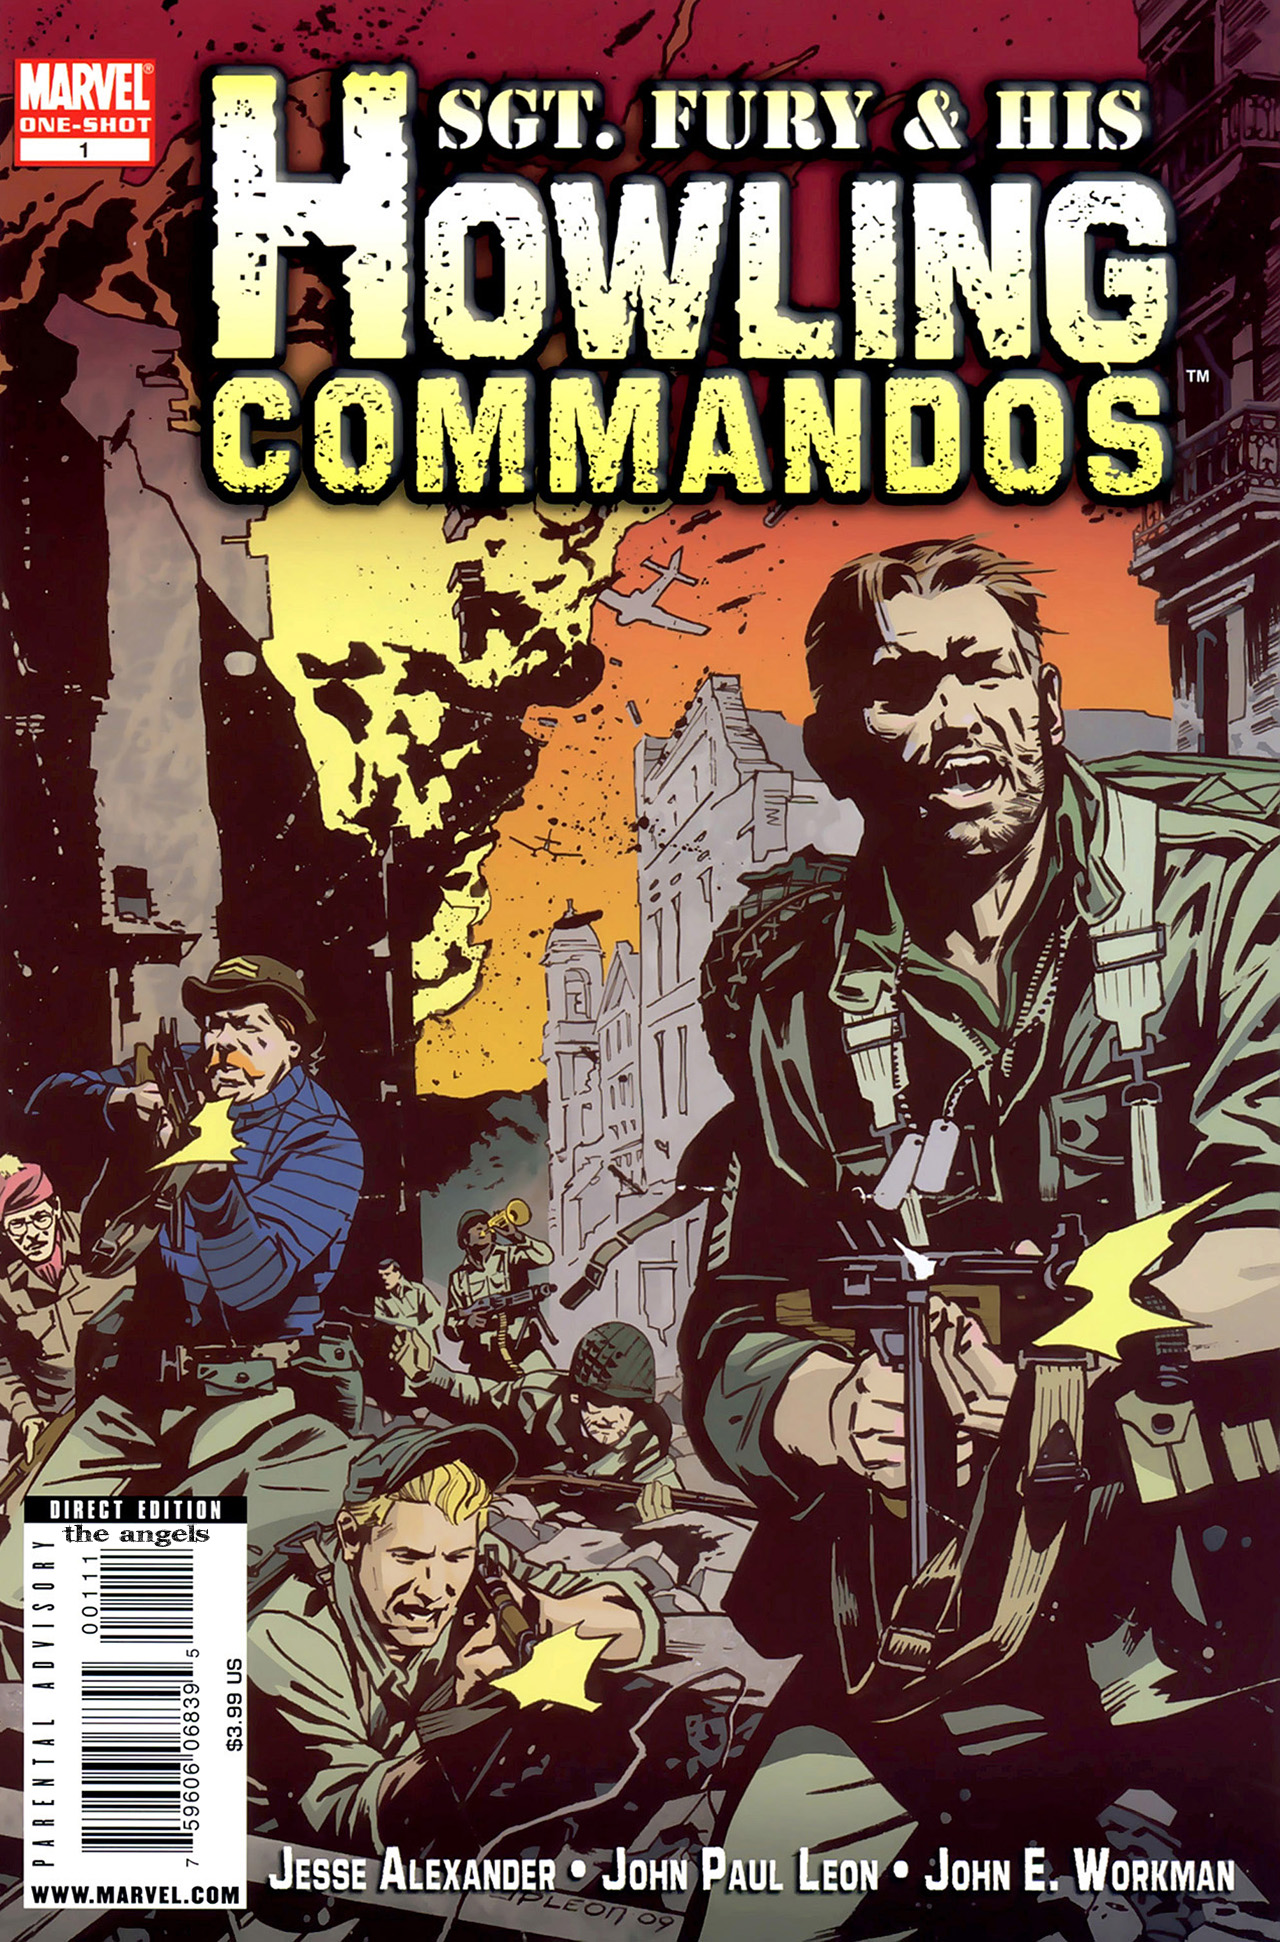 Read online Sgt. Fury & His Howling Commandos comic -  Issue # Full - 1